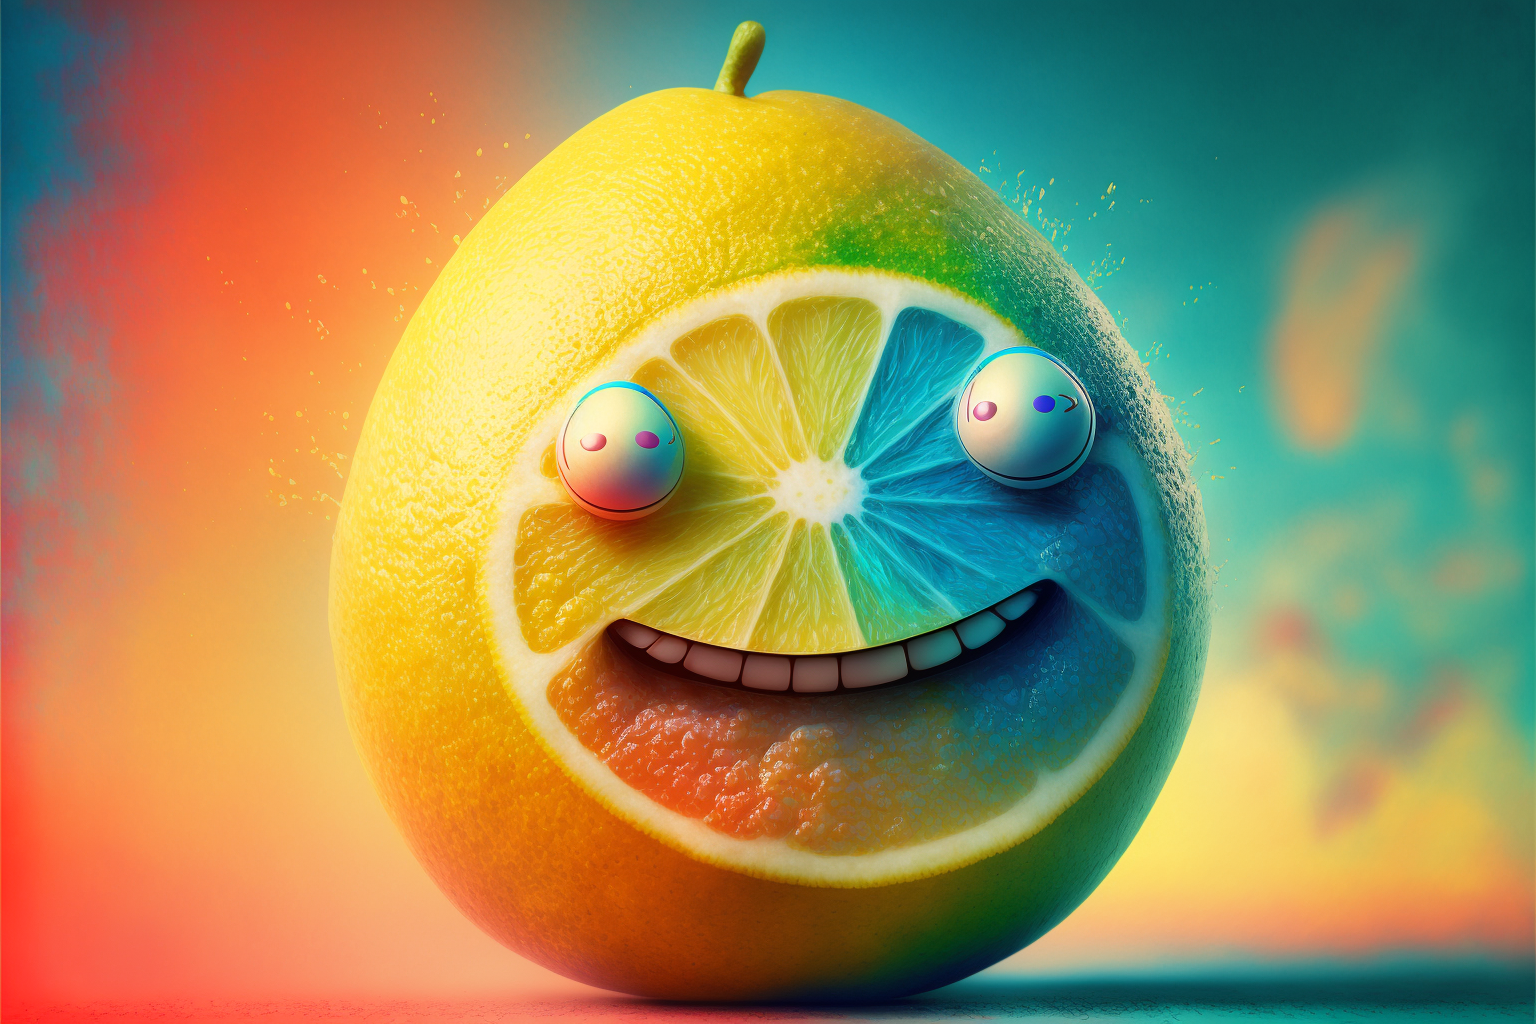 A smiling lemon, created by Midjourney AI